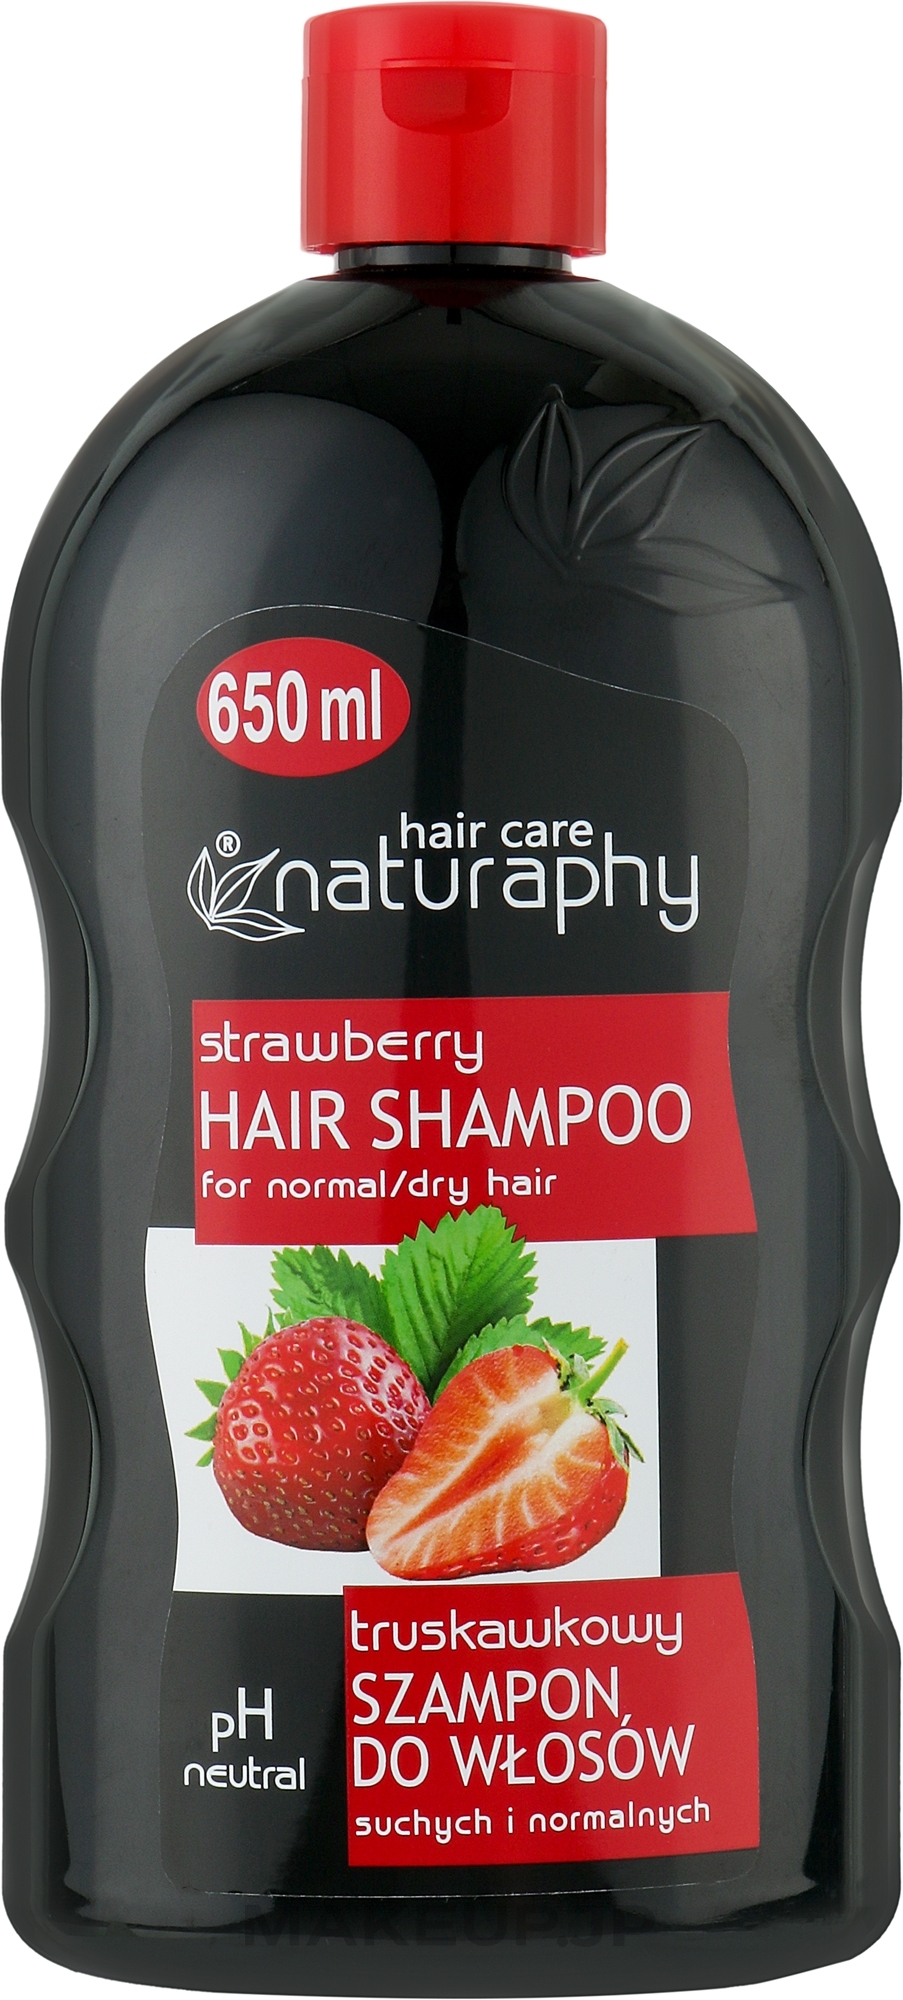 Strawberry Shampoo for Dry and Normal Hair - Naturaphy Shampoo — photo 650 ml